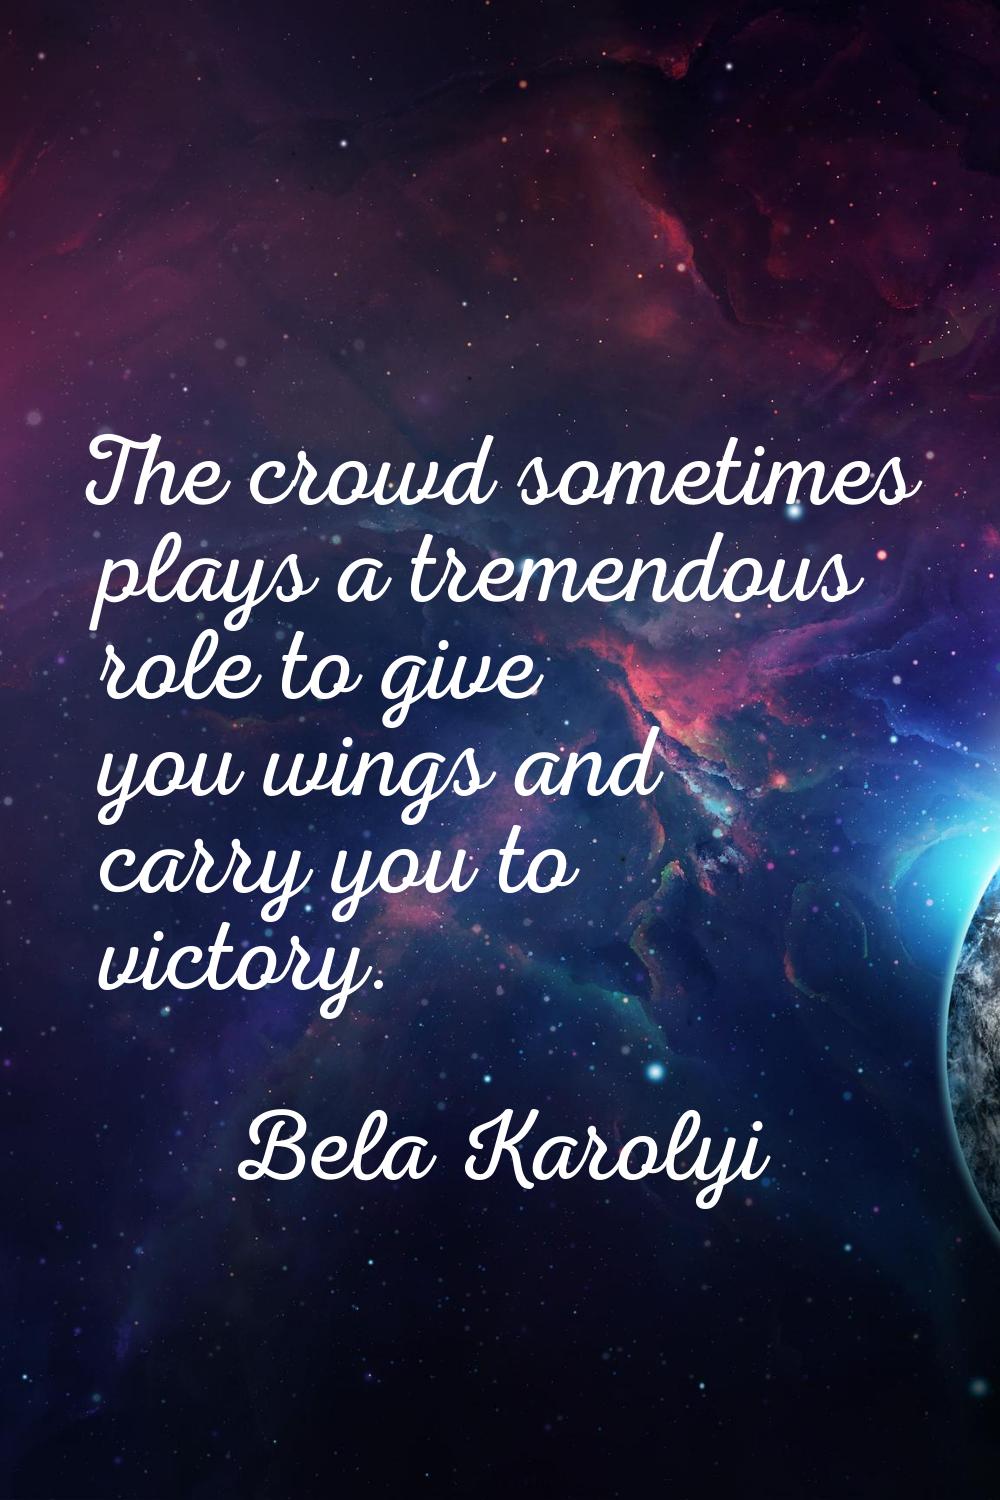 The crowd sometimes plays a tremendous role to give you wings and carry you to victory.